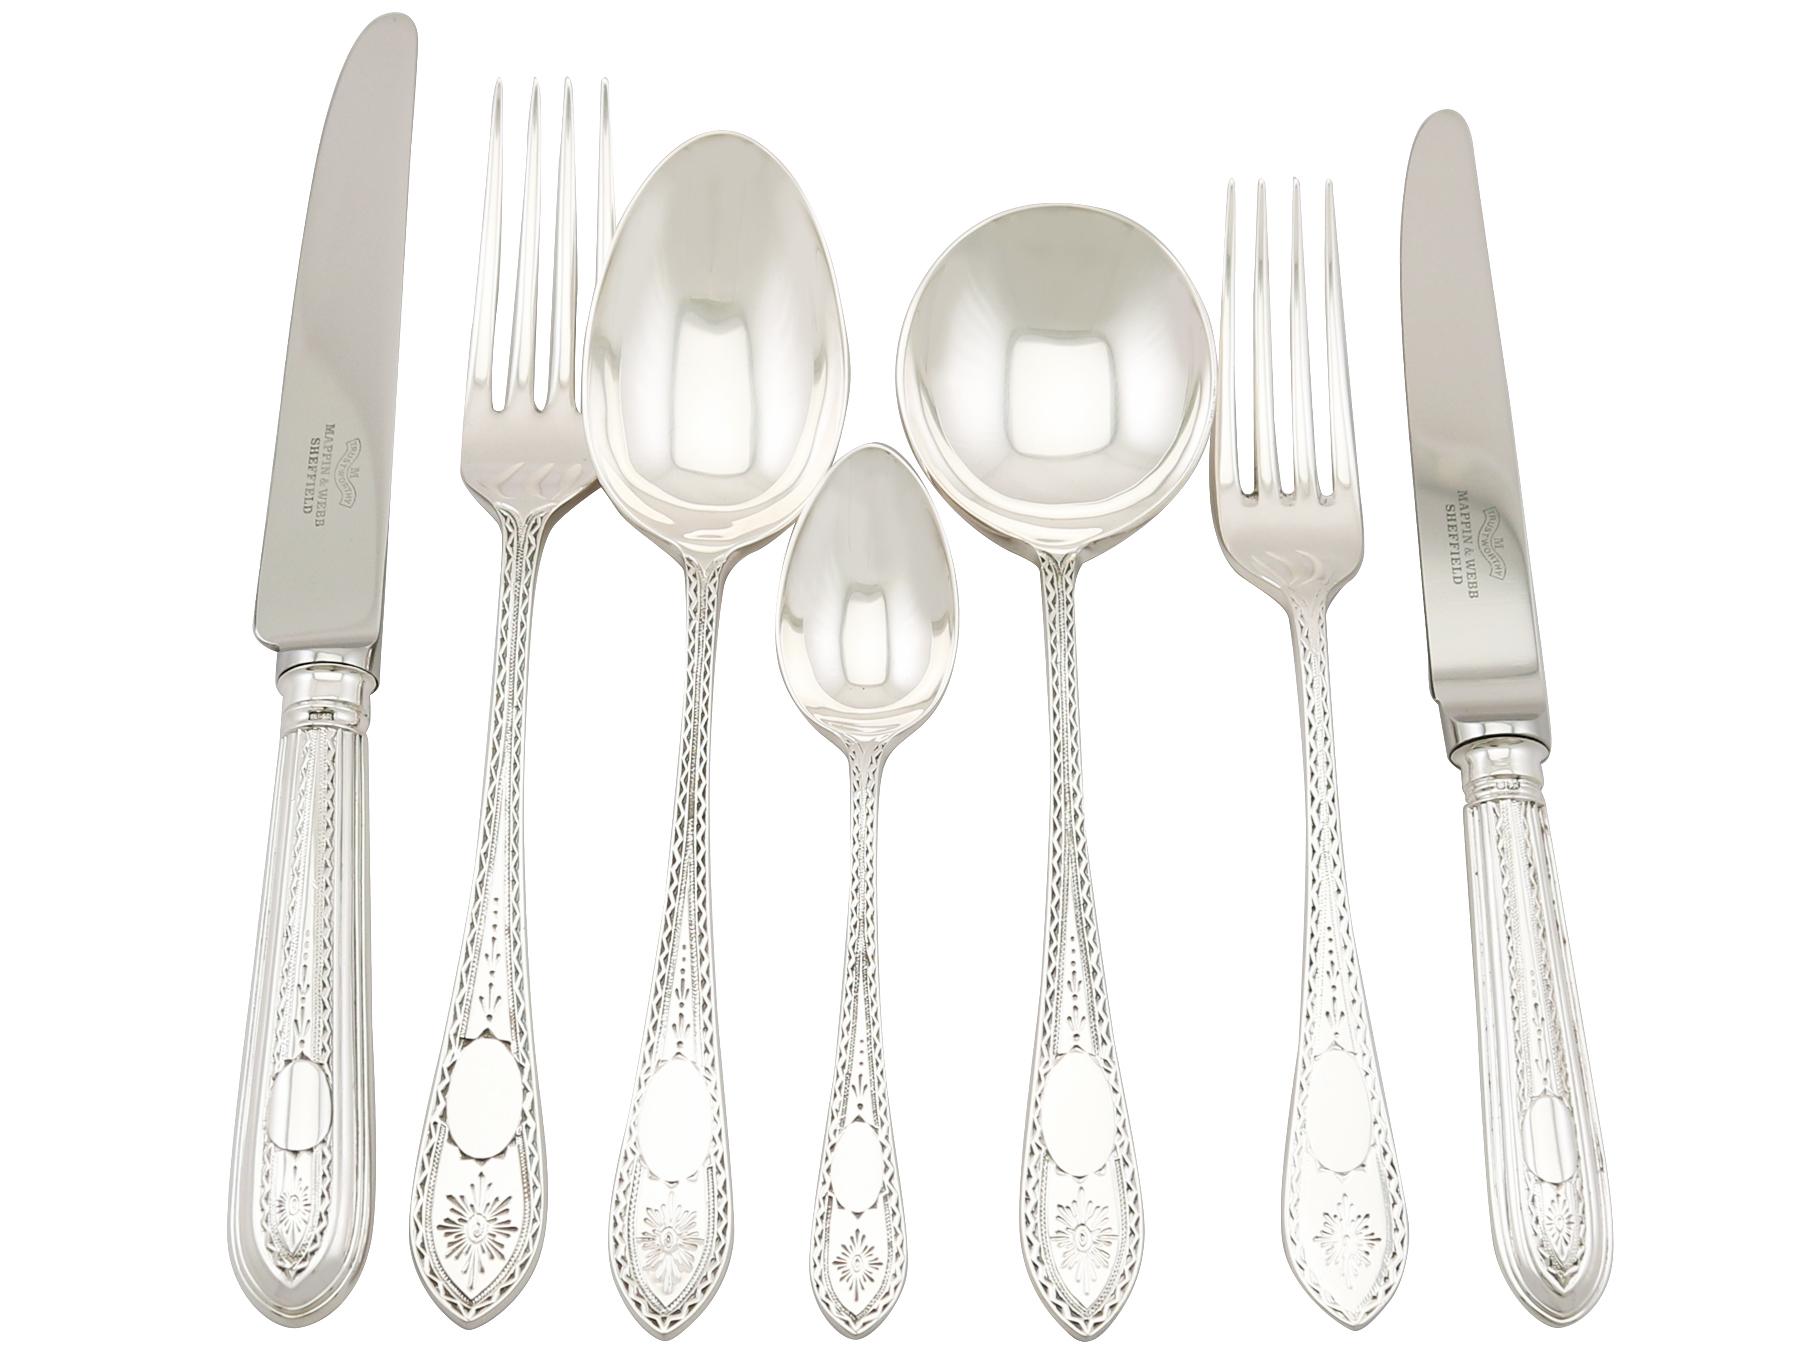 An exceptional, fine and impressive vintage Elizabeth II English sterling silver straight bright cut, Irish pattern flatware service for six persons; an addition to our antique flatware sets.

The pieces of this exceptional vintage straight